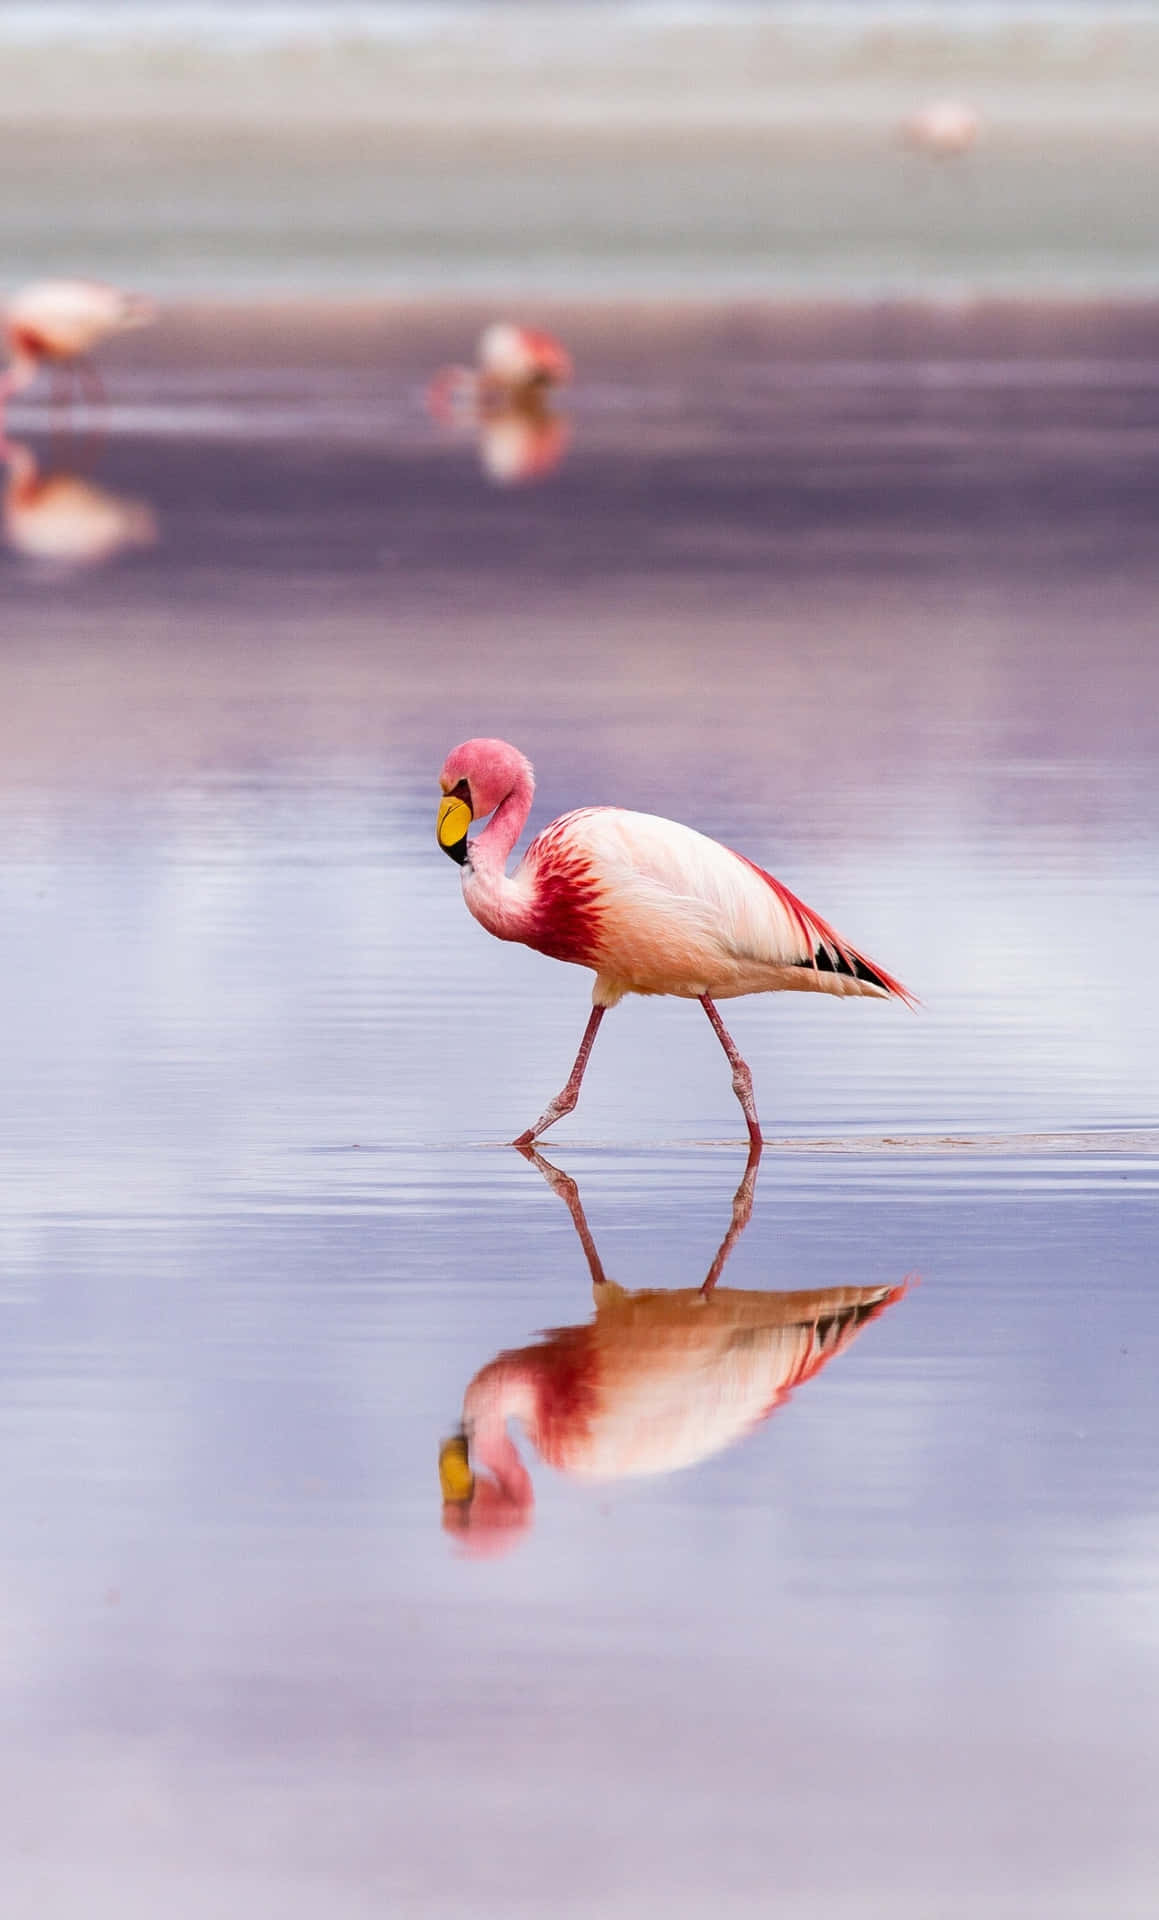 A stunning pink flamingo against a clear sky, photographed from an iPhone Wallpaper